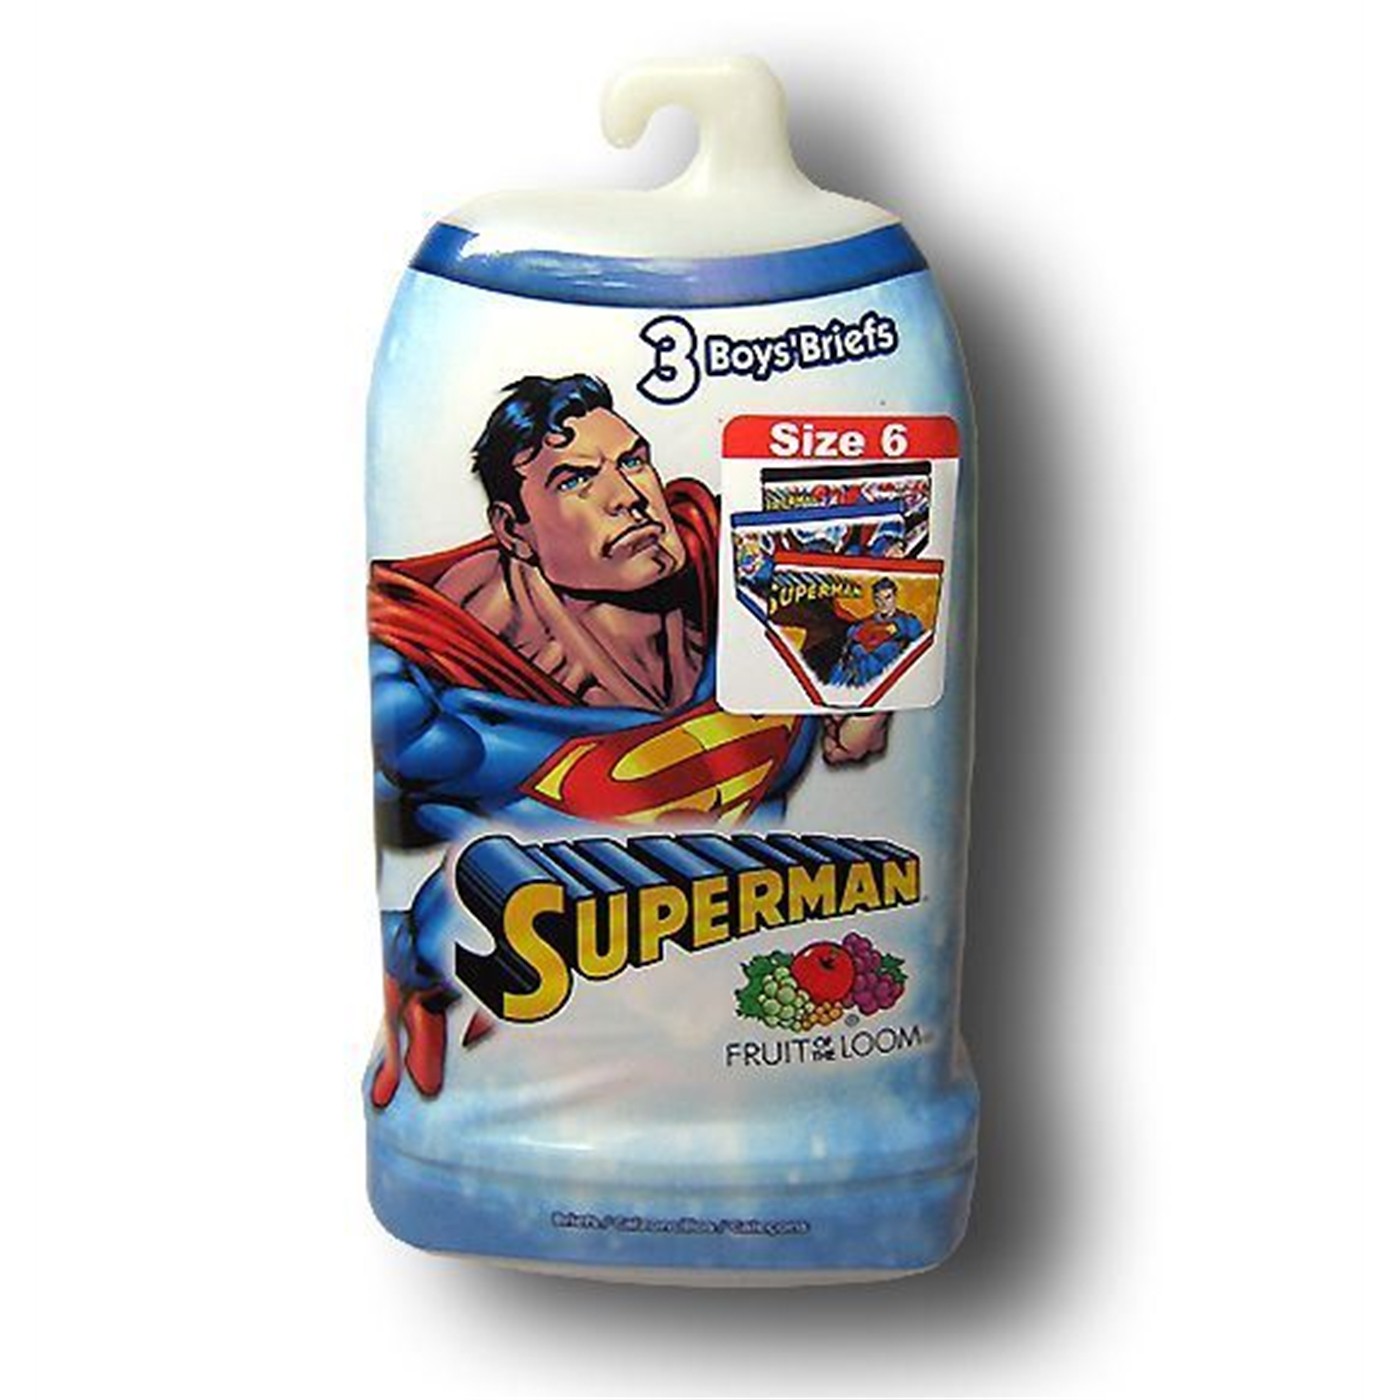 Superman Juvy Powerful Speed Briefs 3 Pack